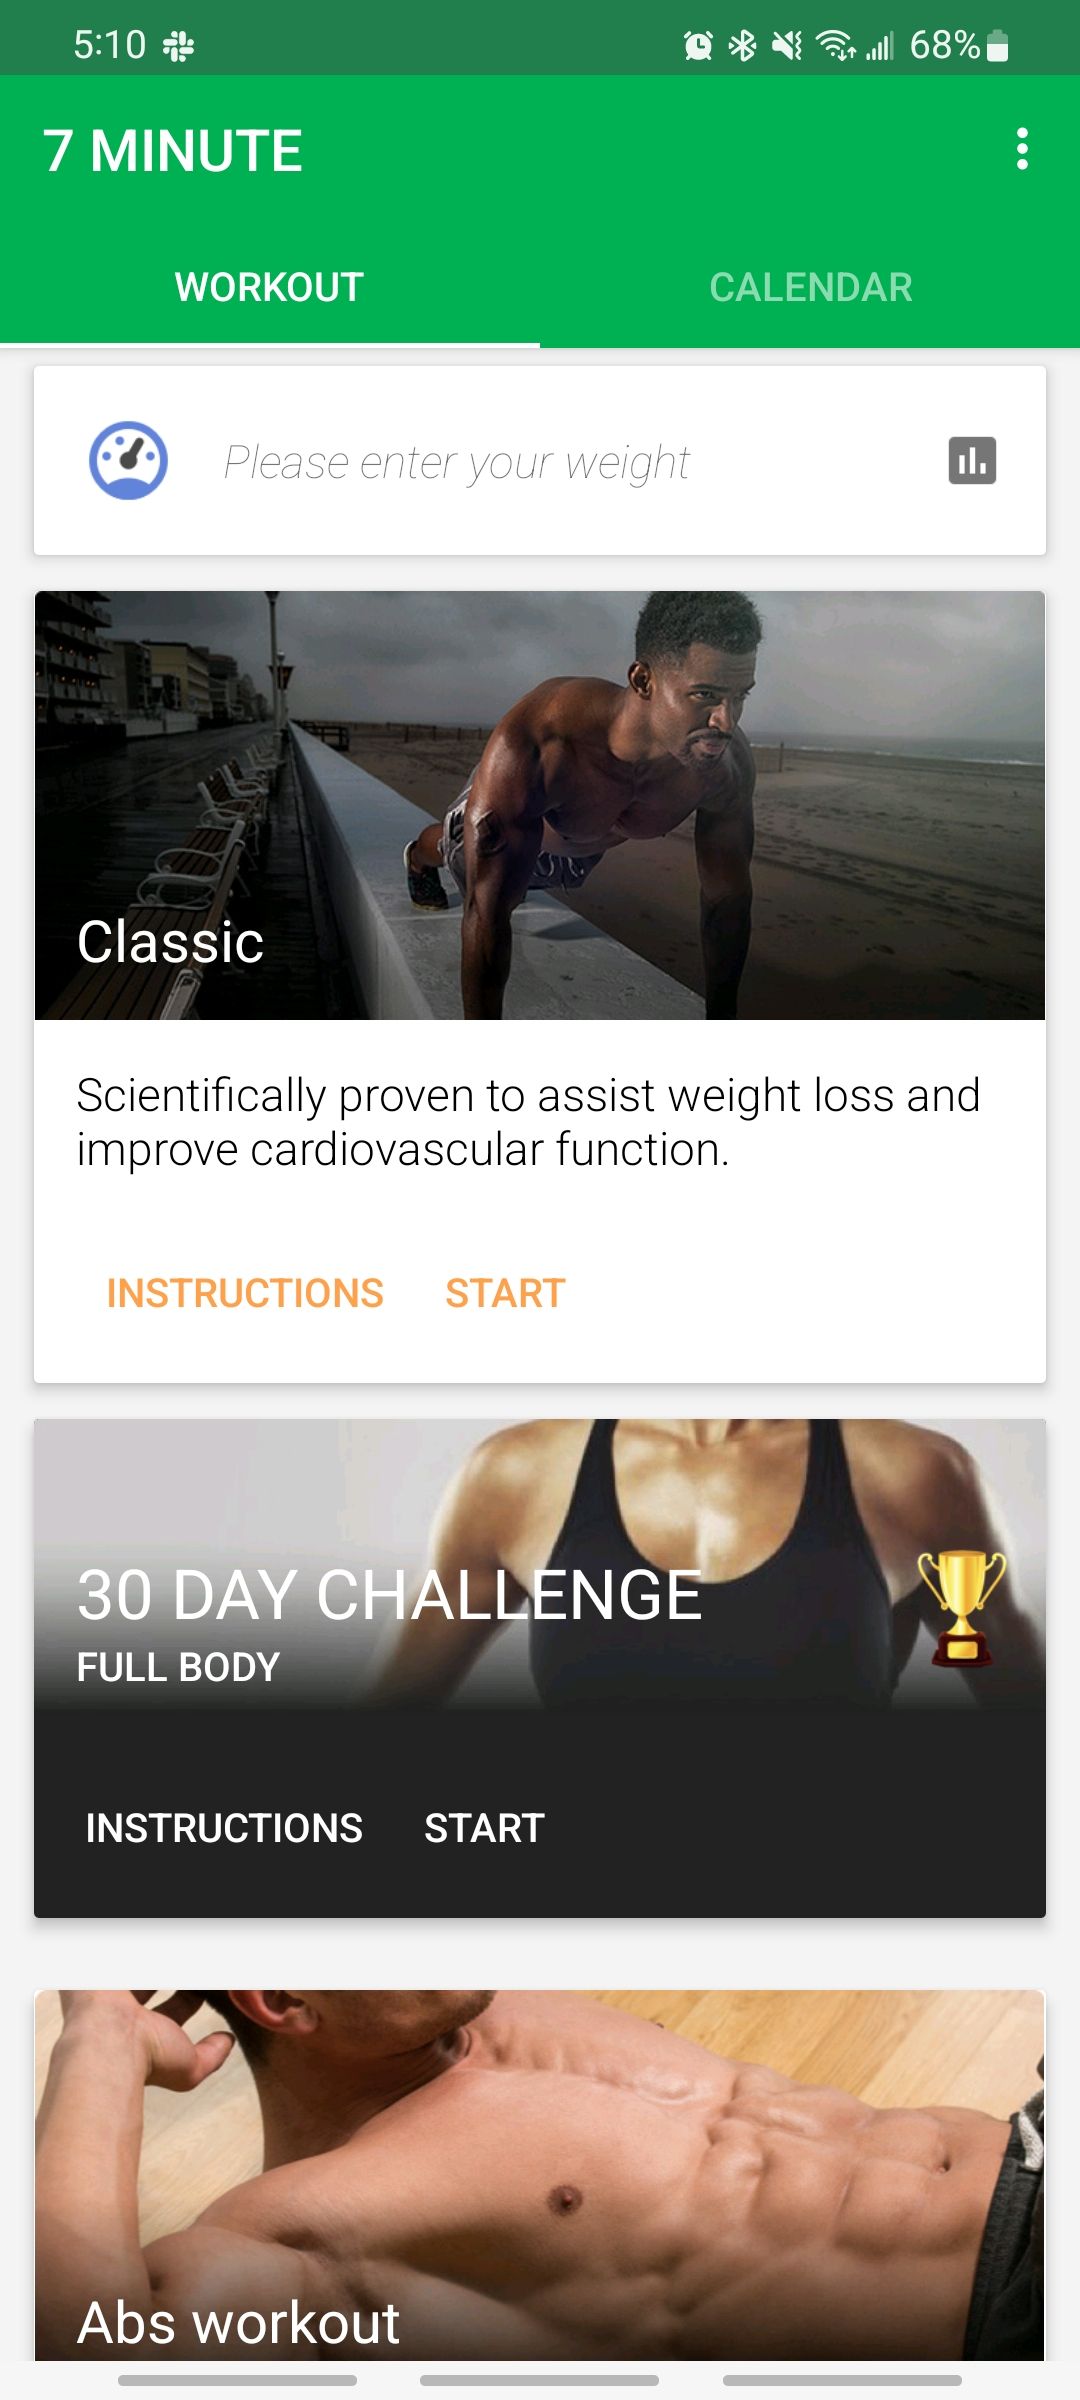 7 minute workout app home screen